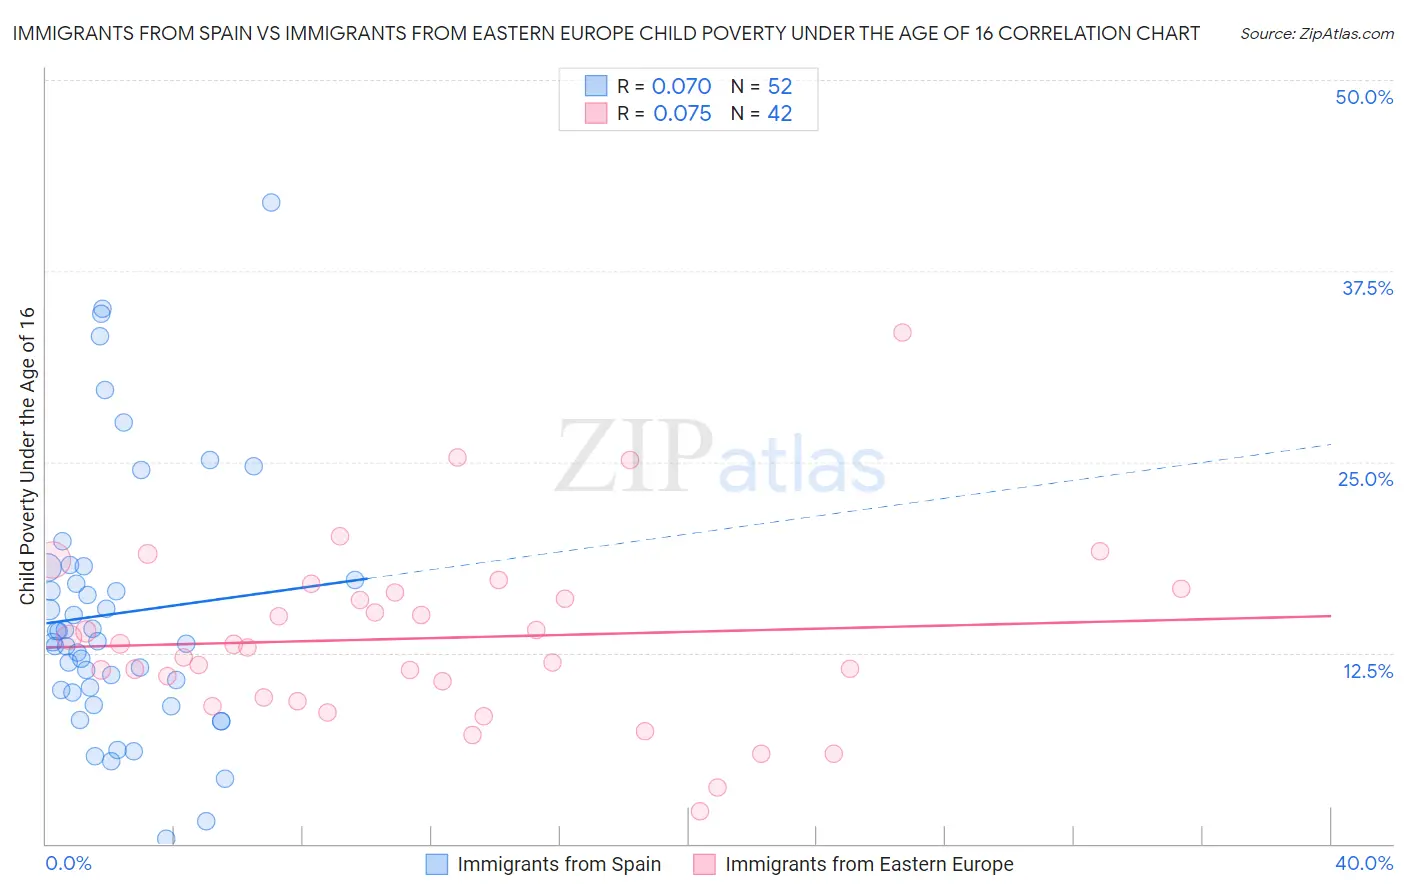 Immigrants from Spain vs Immigrants from Eastern Europe Child Poverty Under the Age of 16